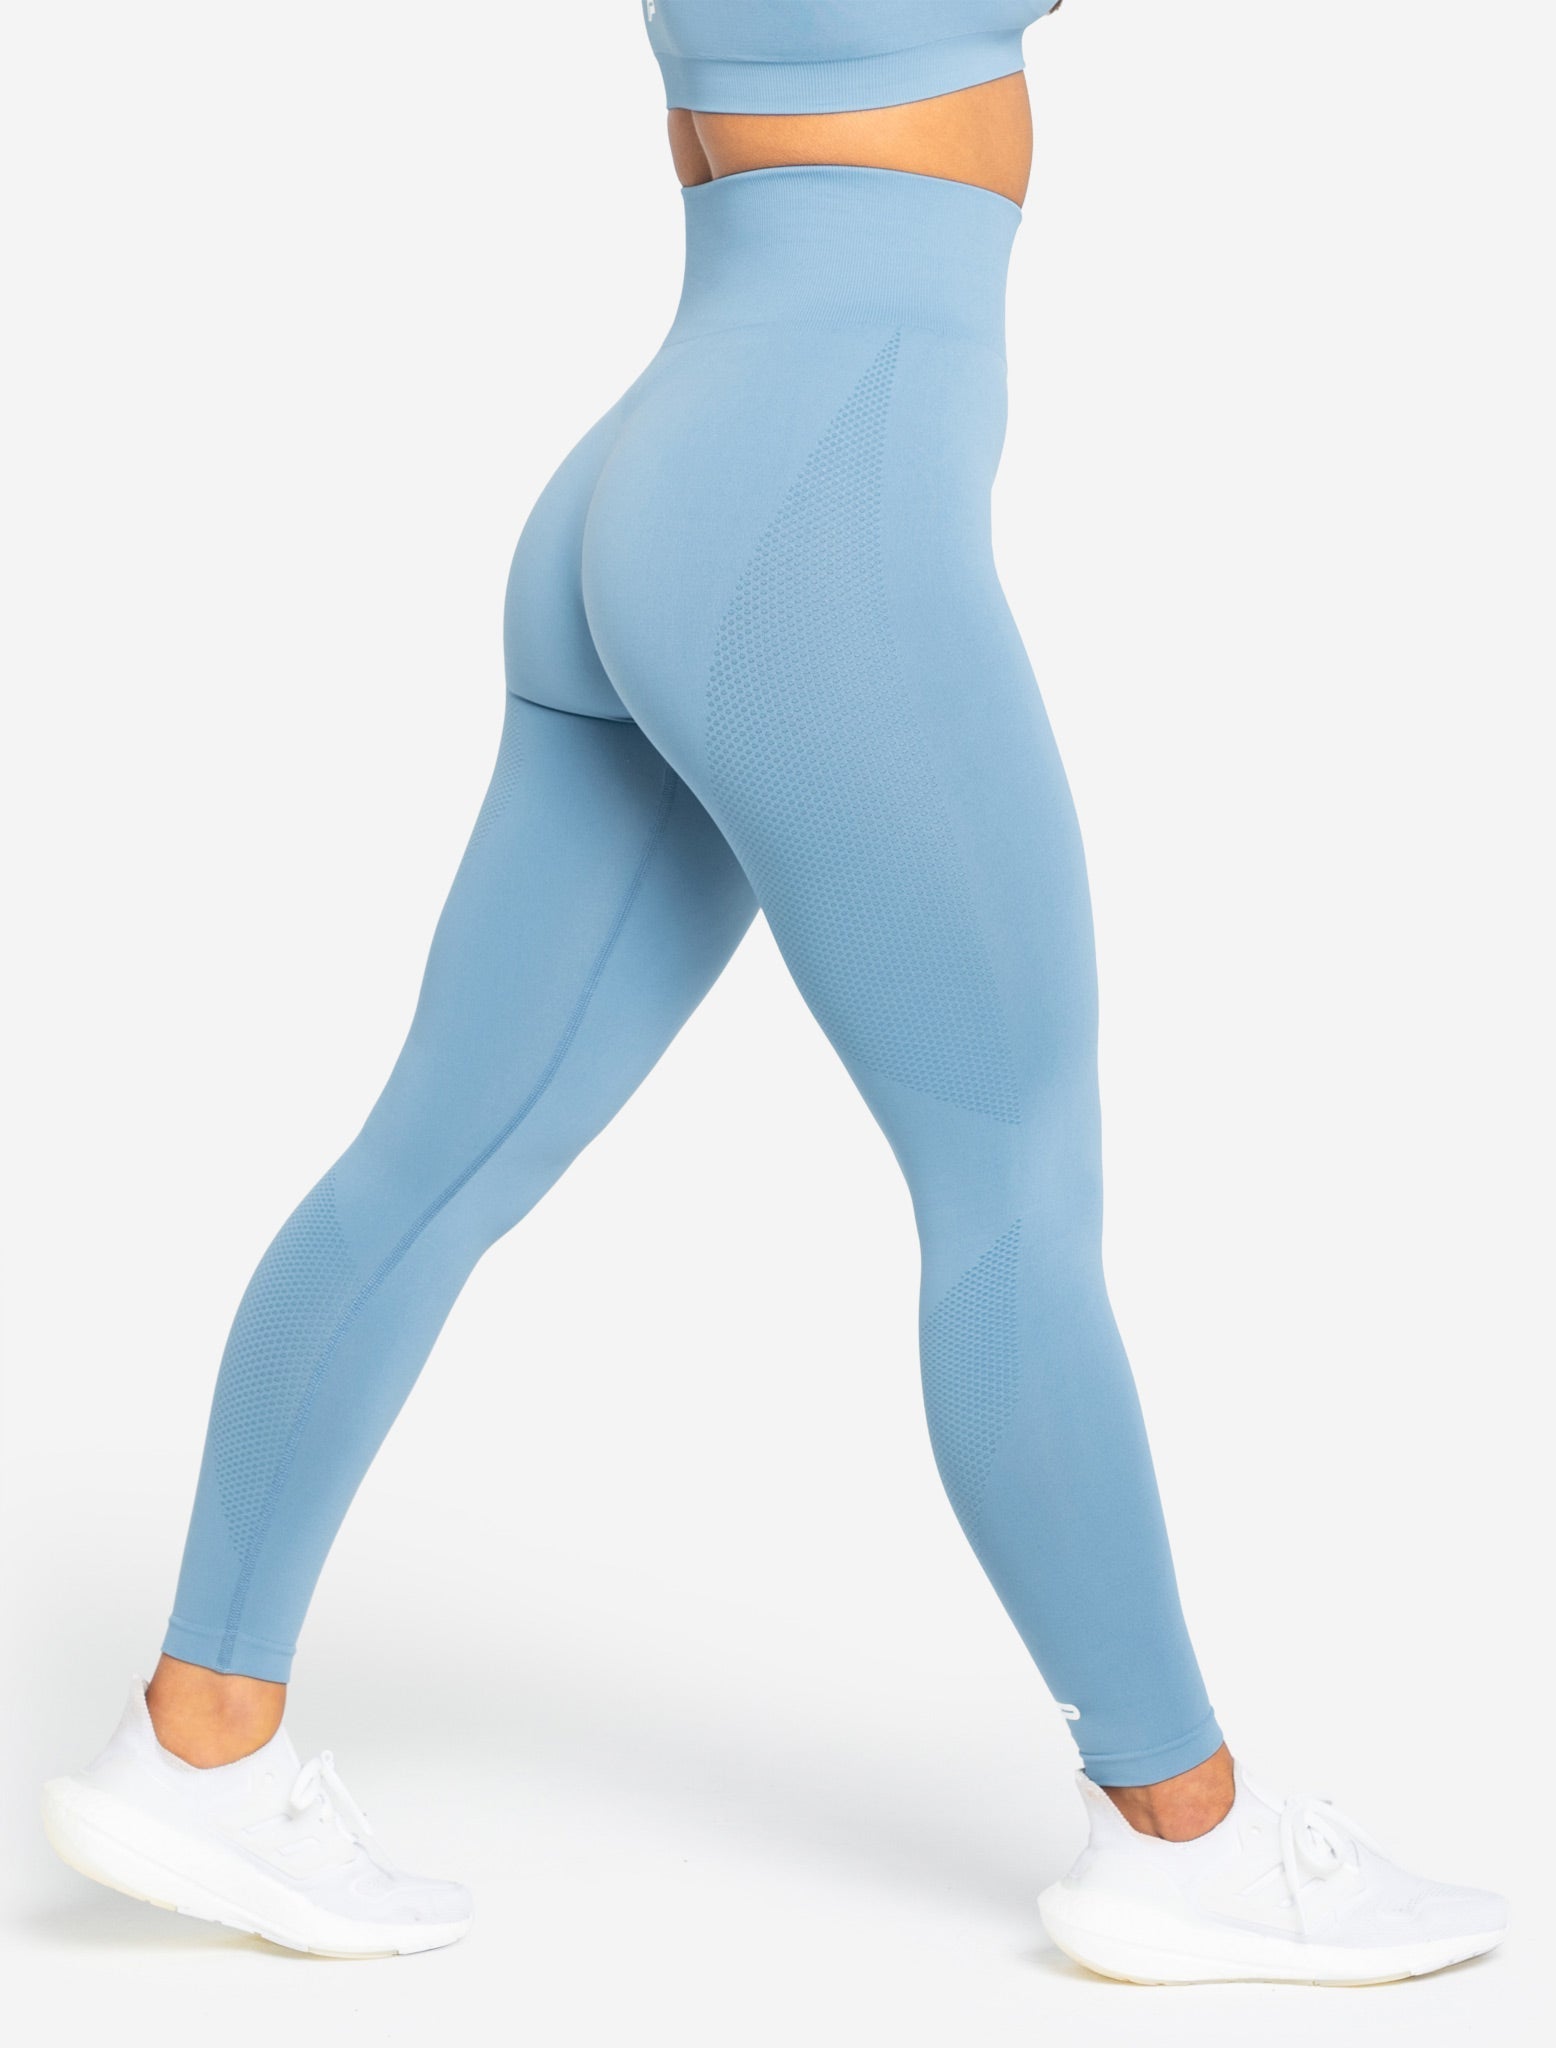 Blue Solid Color Yoga Leggings, Light Baby Blue Athletic Women's  Tights-Made in USA/EU/MX